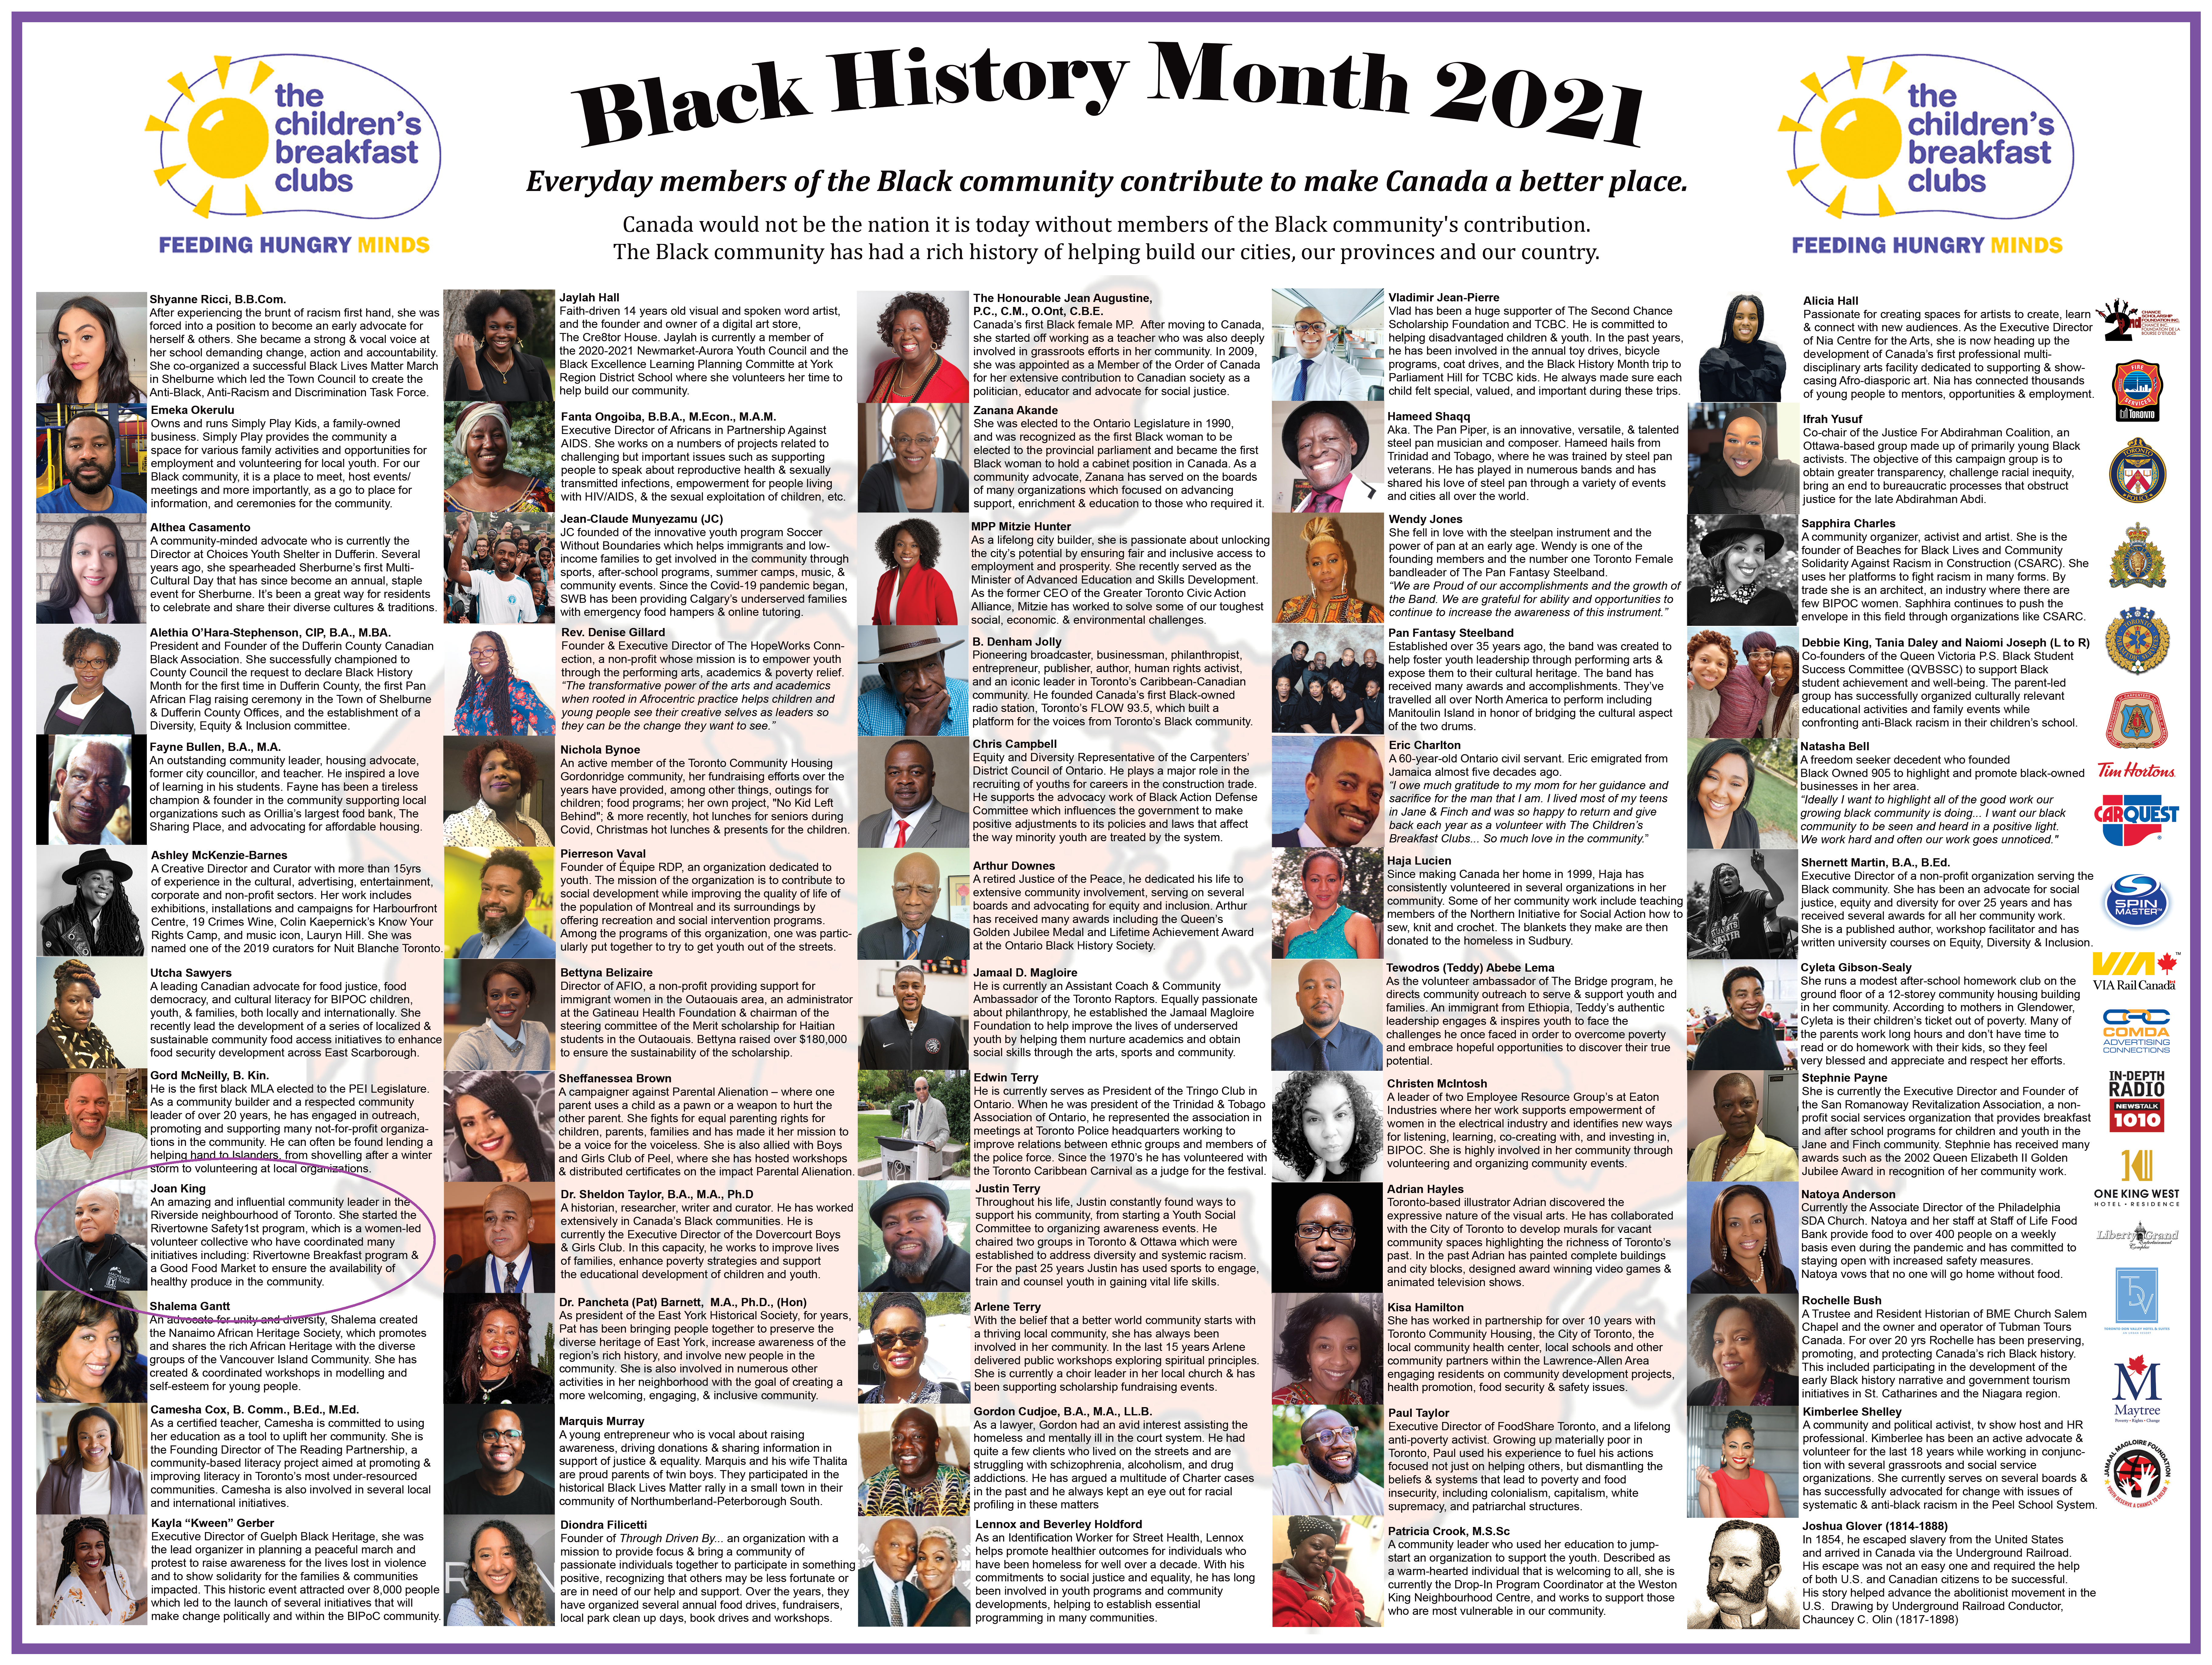 Calendar from the Children's Breakfast Clubs of Canada featuring community members Black History Month 2021, Joan King is in the first column